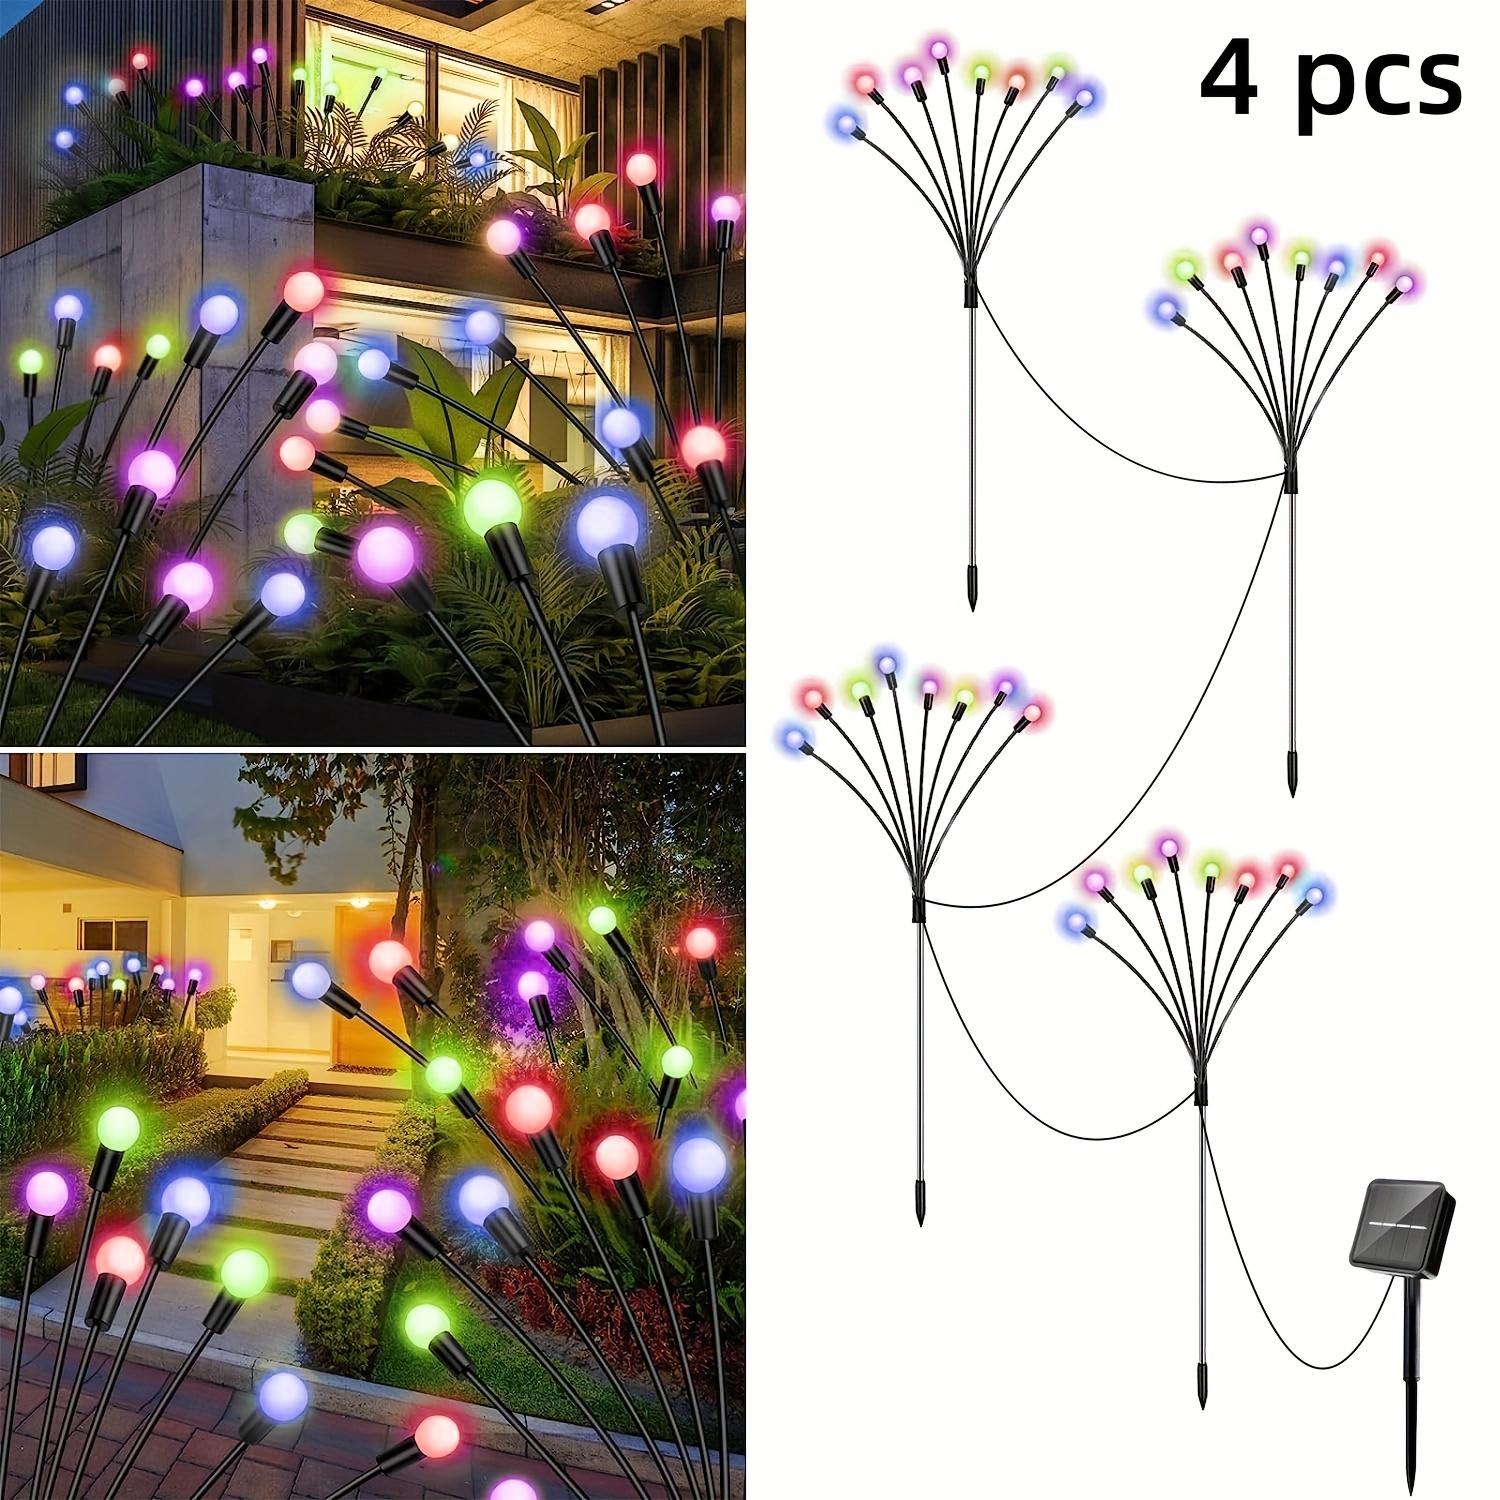 

4 Pack With 32 Led Lights, Firefly Floor Lights, Outdoor Decorative Led Lights, Garden Decorative Ball Lights Garden Lights Holiday Party Christmas Independence Day Dance Lighting Decorate Your Garden